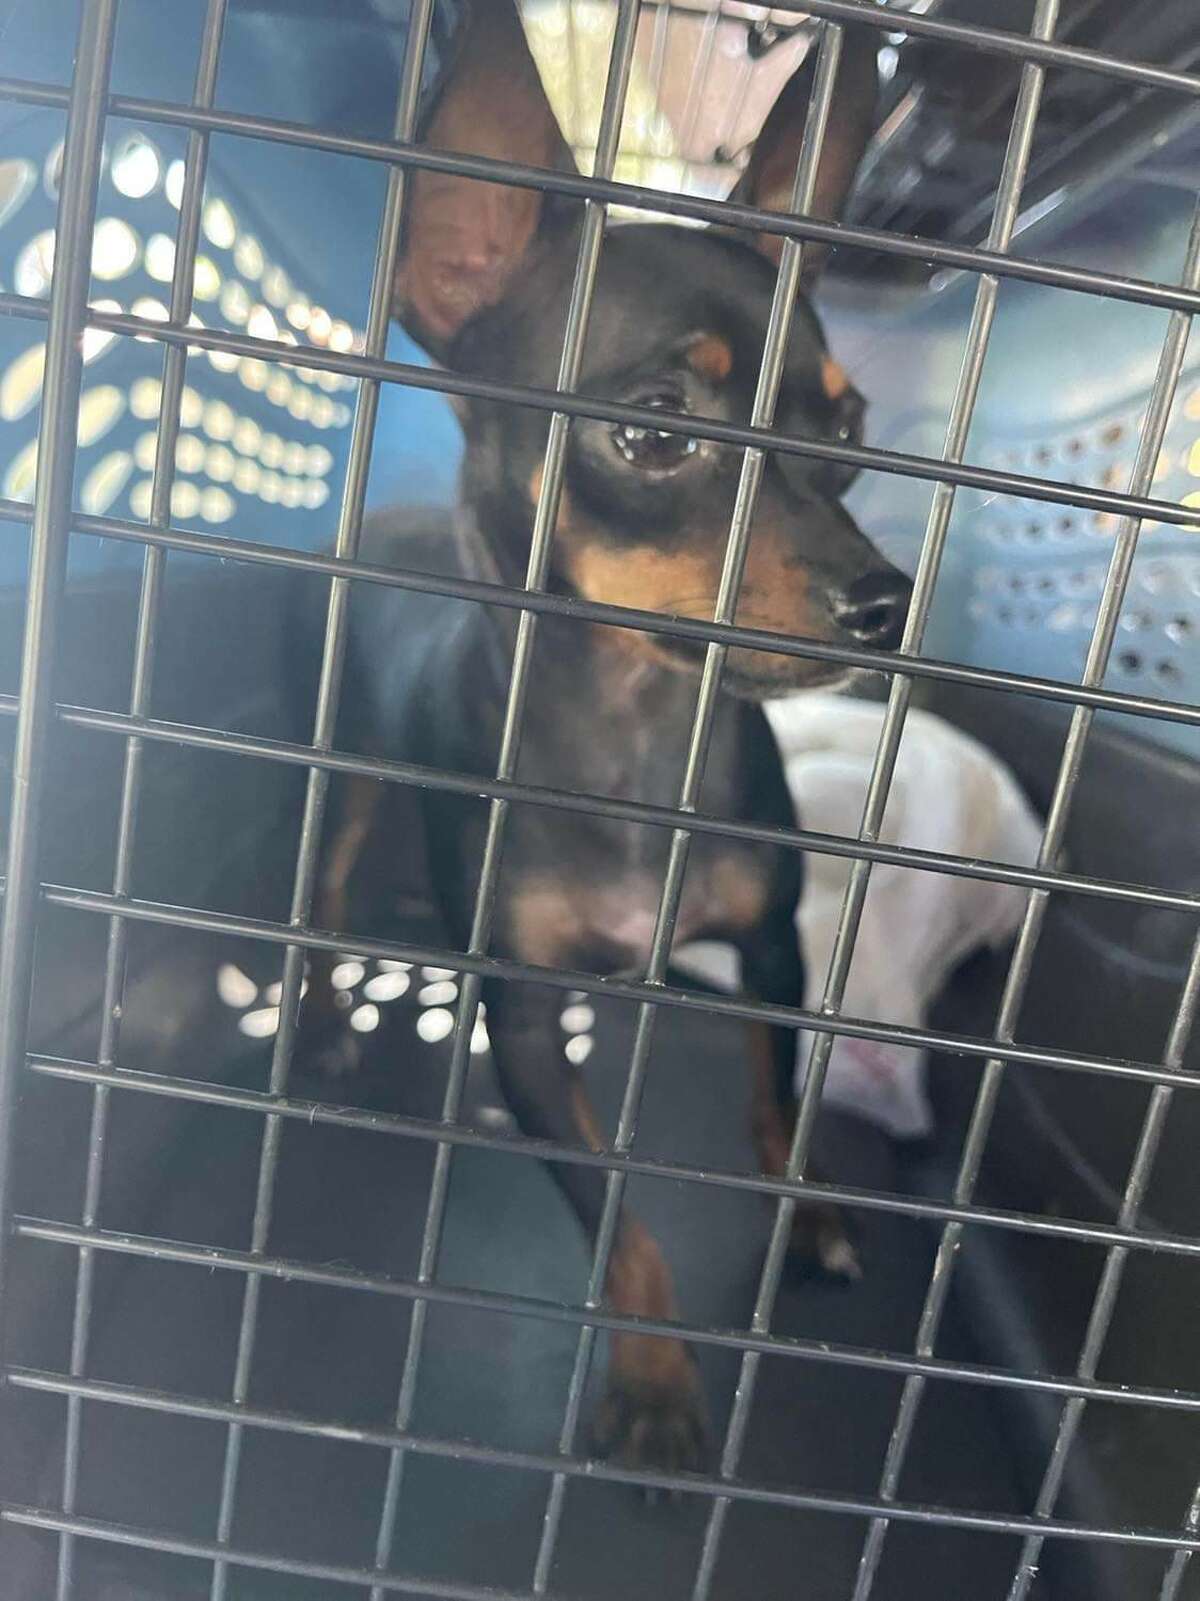 Chiripa being transported from Laredo, Texas to San Antonio, Texas where she would then be onboarded a cargo van for pets to travel to New Jersey and arrive to NYC by Monday. 